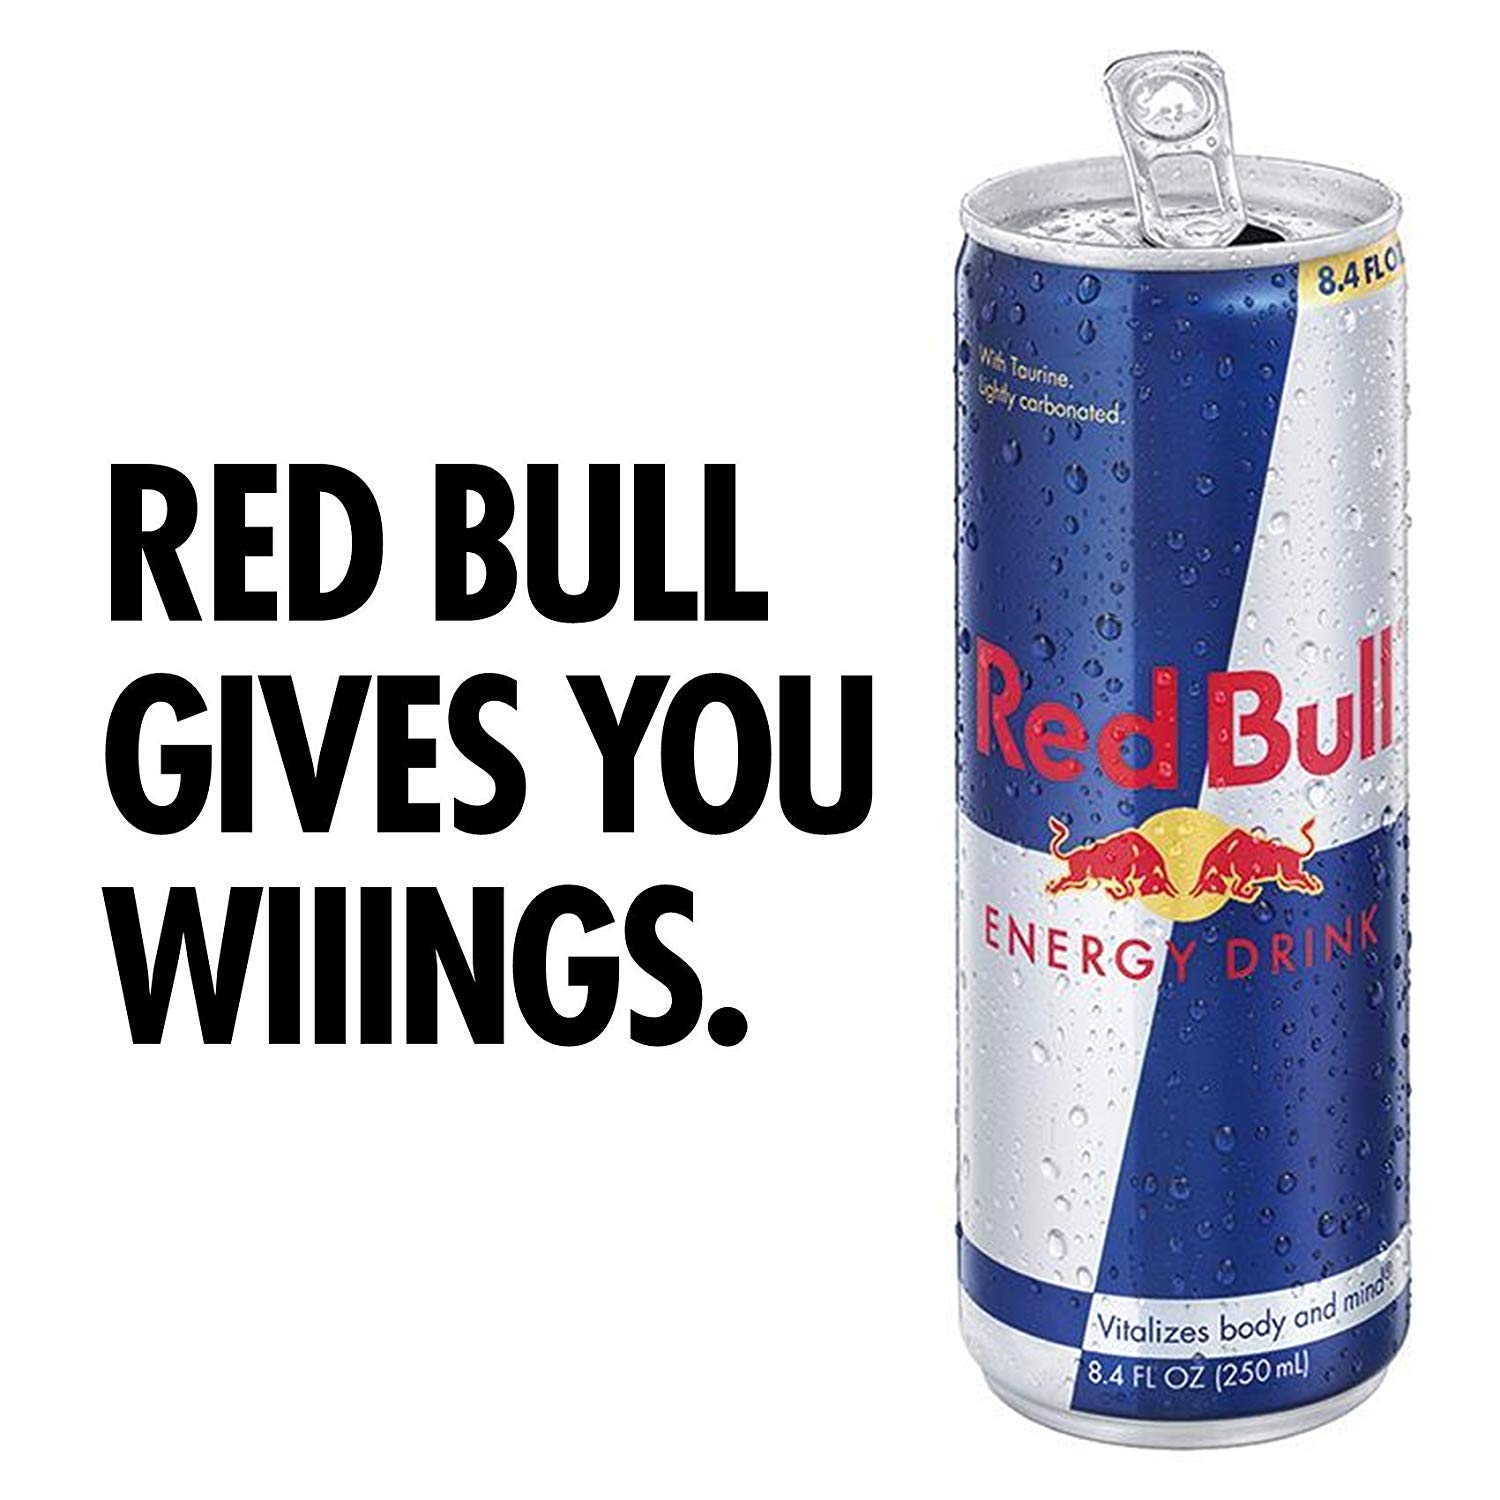 konkurs region vrede Red Bull Gaming on Twitter: "Fun fact: The can design never changed. Since  1987. The first time Red Bull was sold." / Twitter